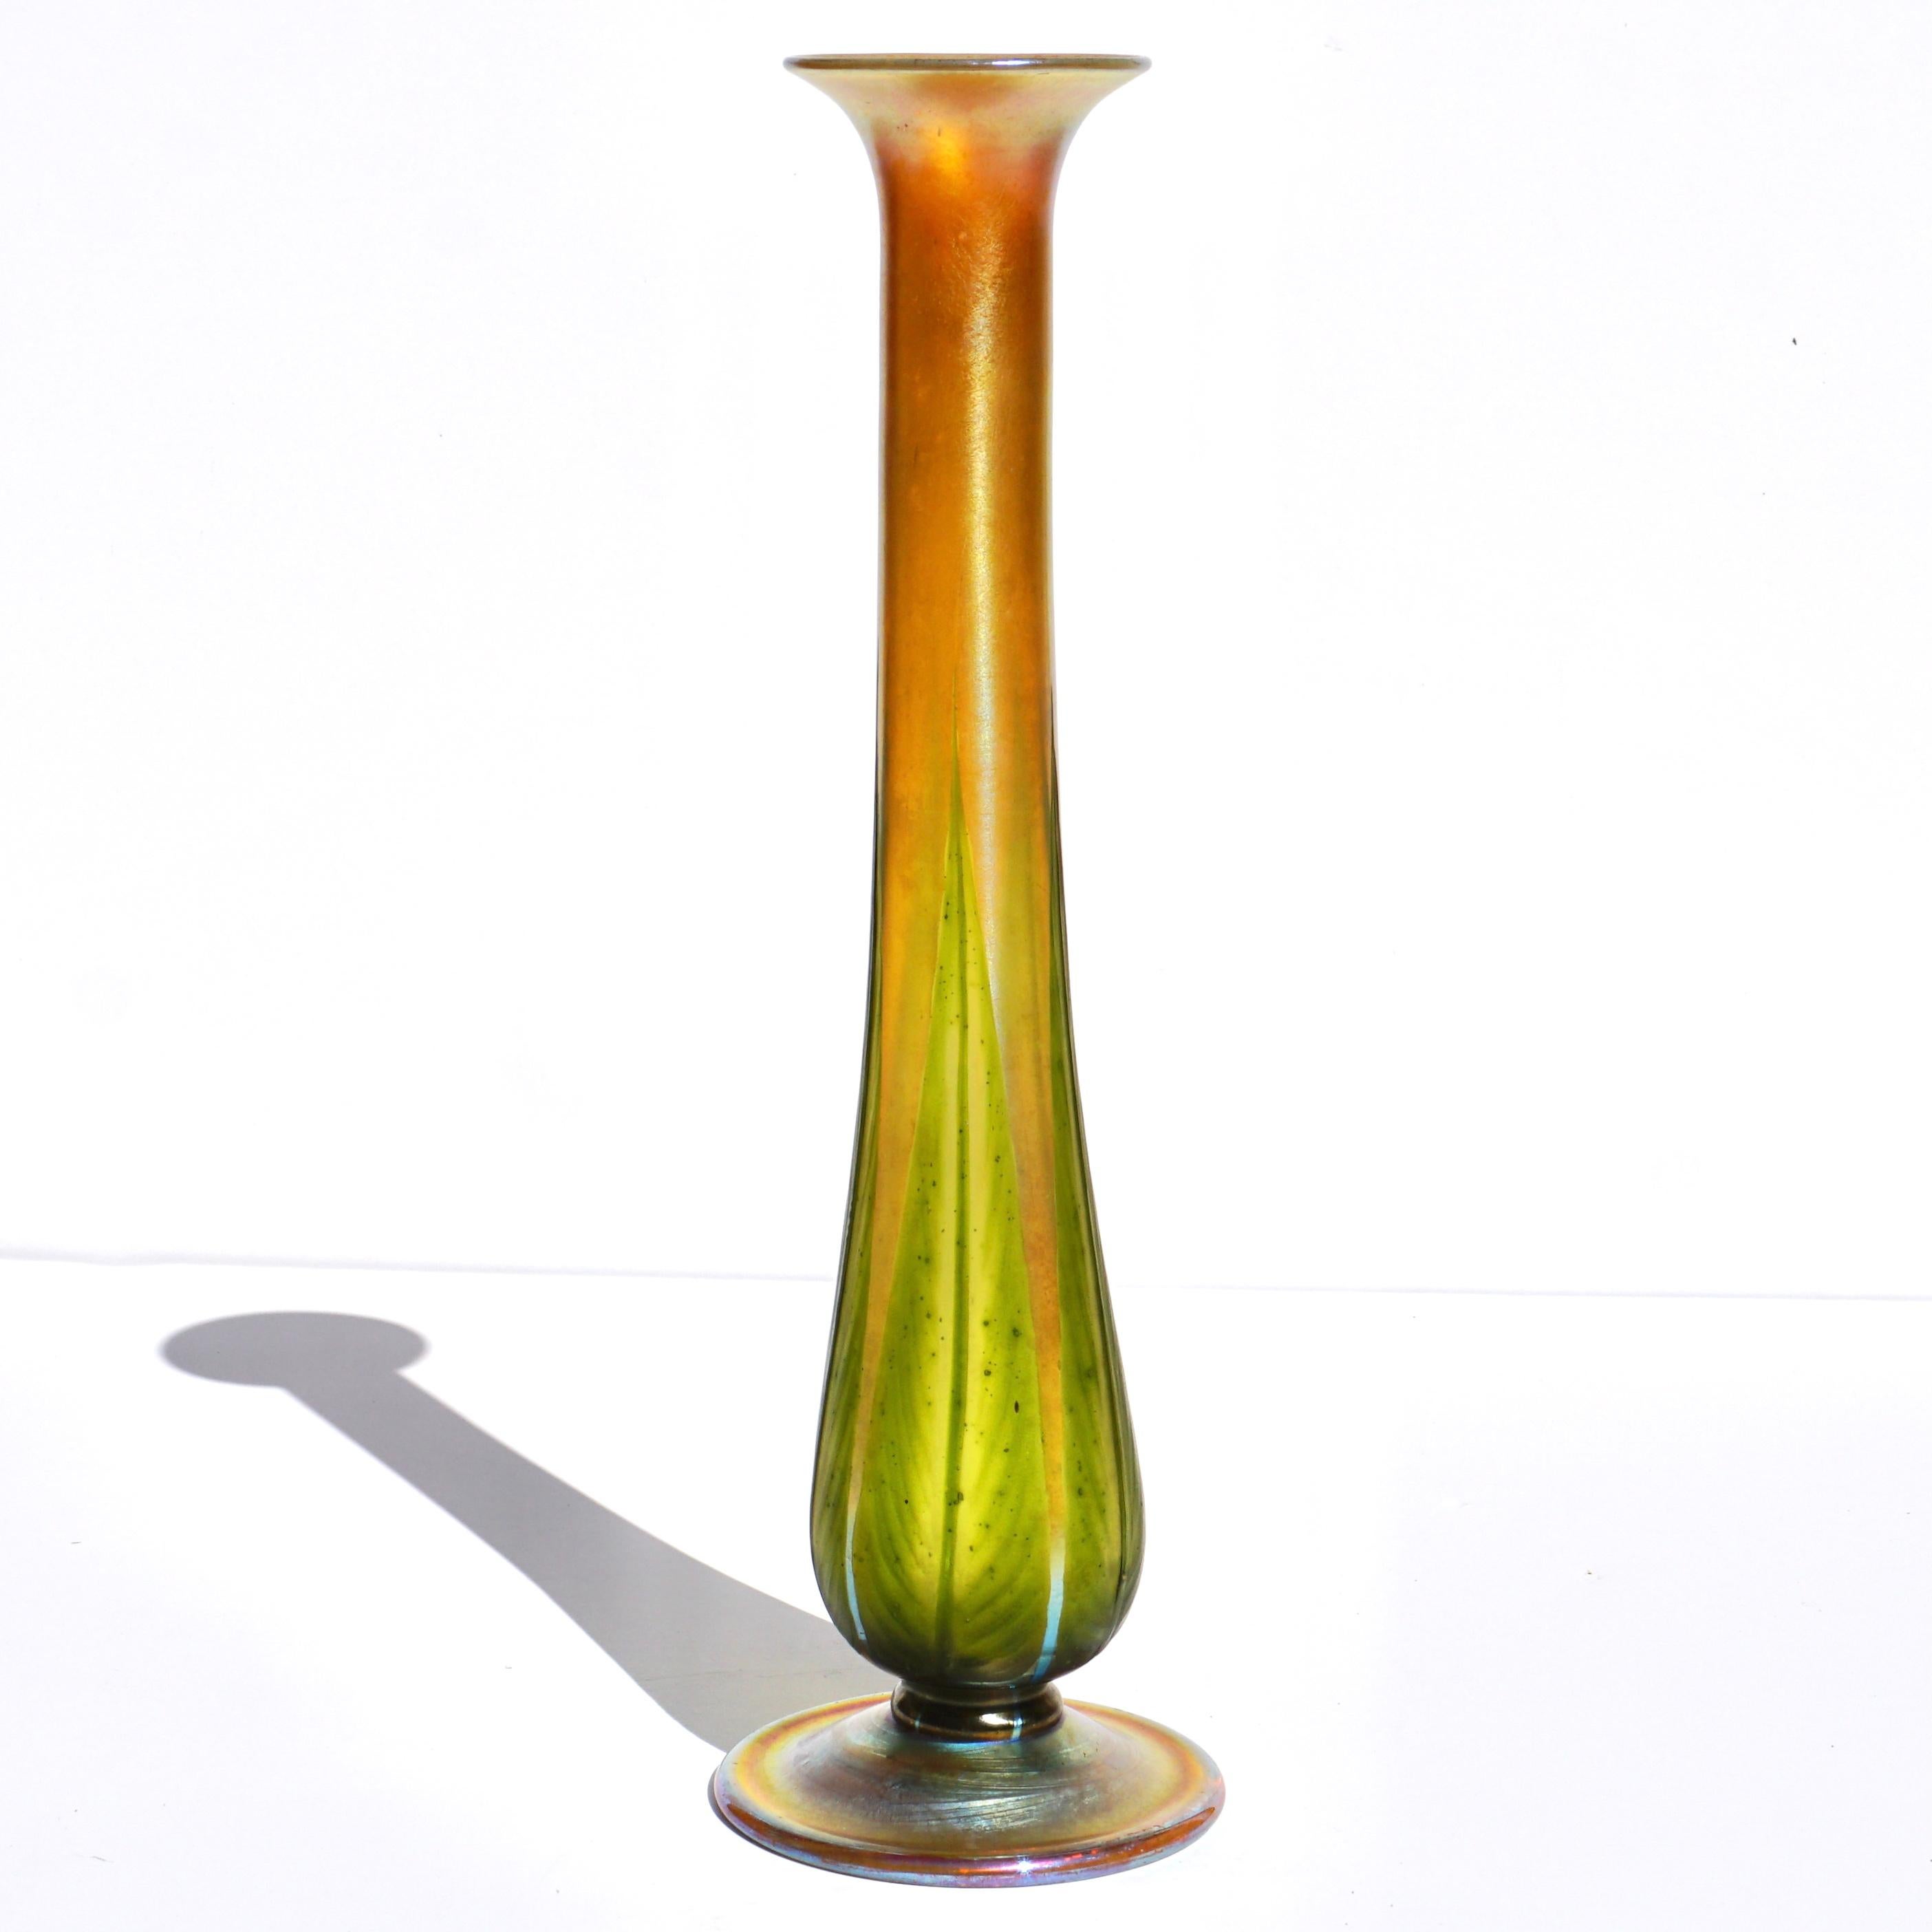 Tall Tiffany Studios wheel-carved Favrile glass leaves vase, 1918 Art Nouveau.

Marks: 7062M L.C. Tiffany Inc. Favrile

Measures: Height: 11.85 inches (29.8 cm) Diameter: 3.5 Inches

Slender footed vase with five delicately wheel-carved leaves